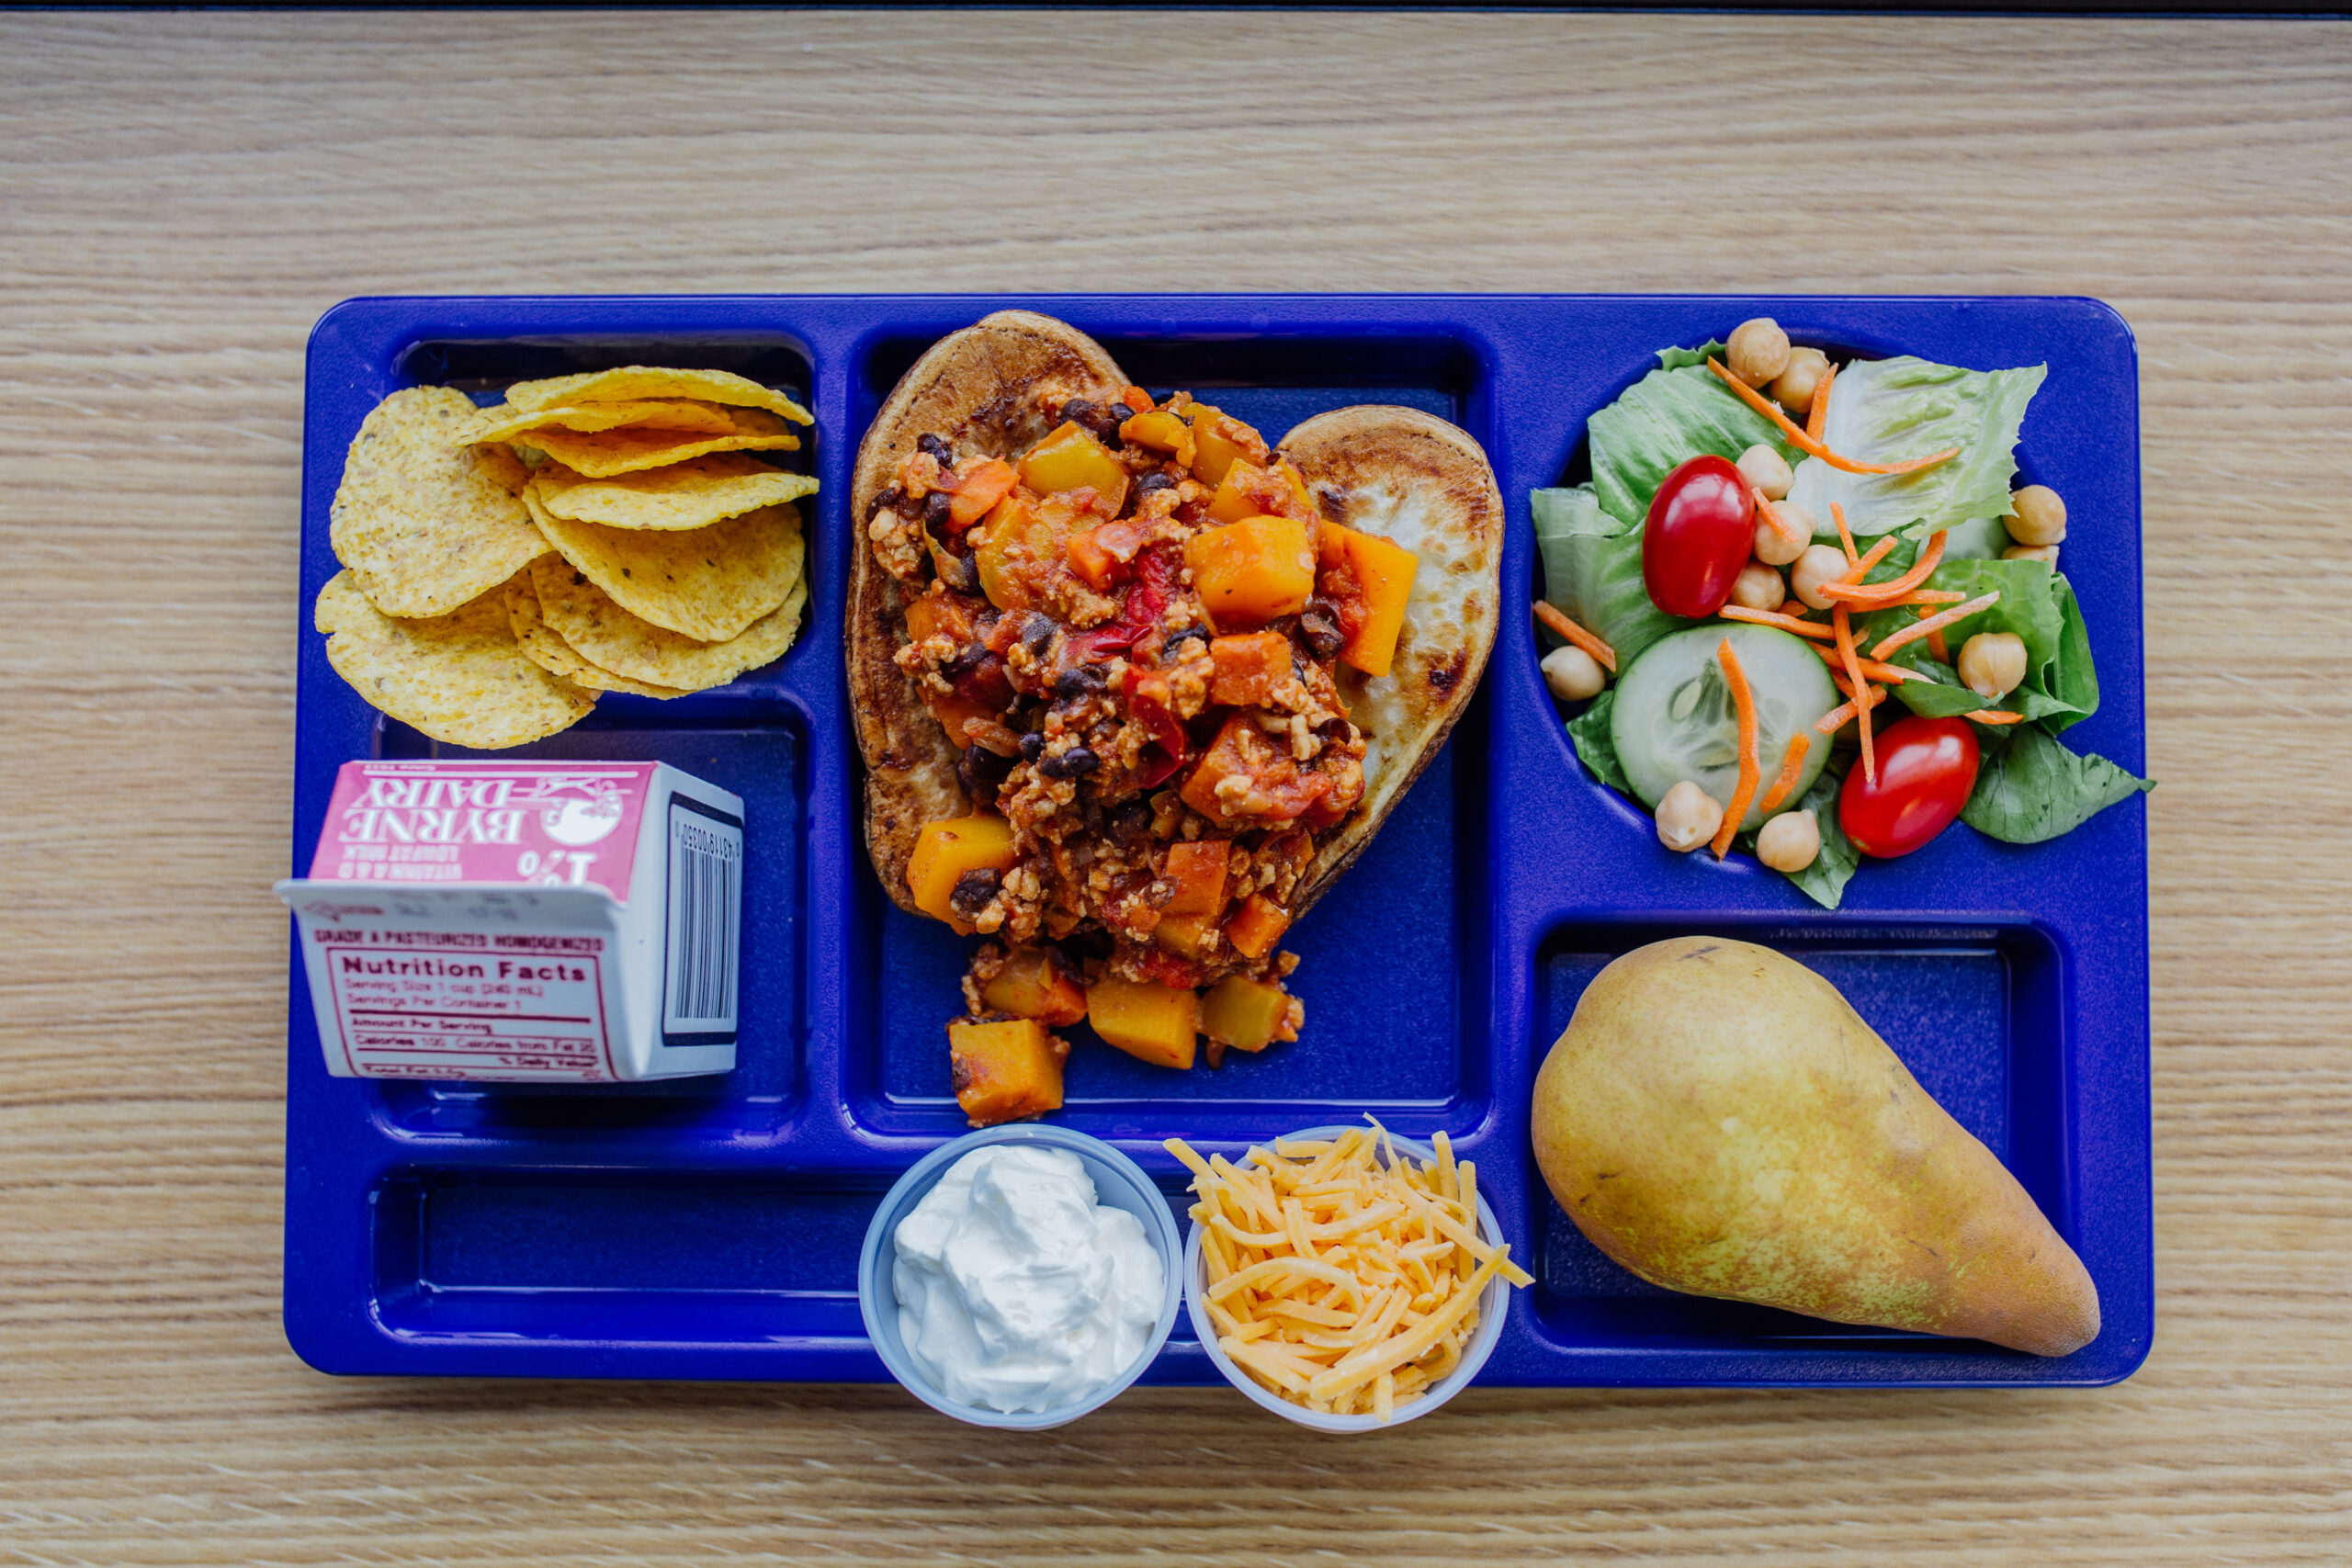 New Report: Decline in New York School Meals Participation - Healthy ...